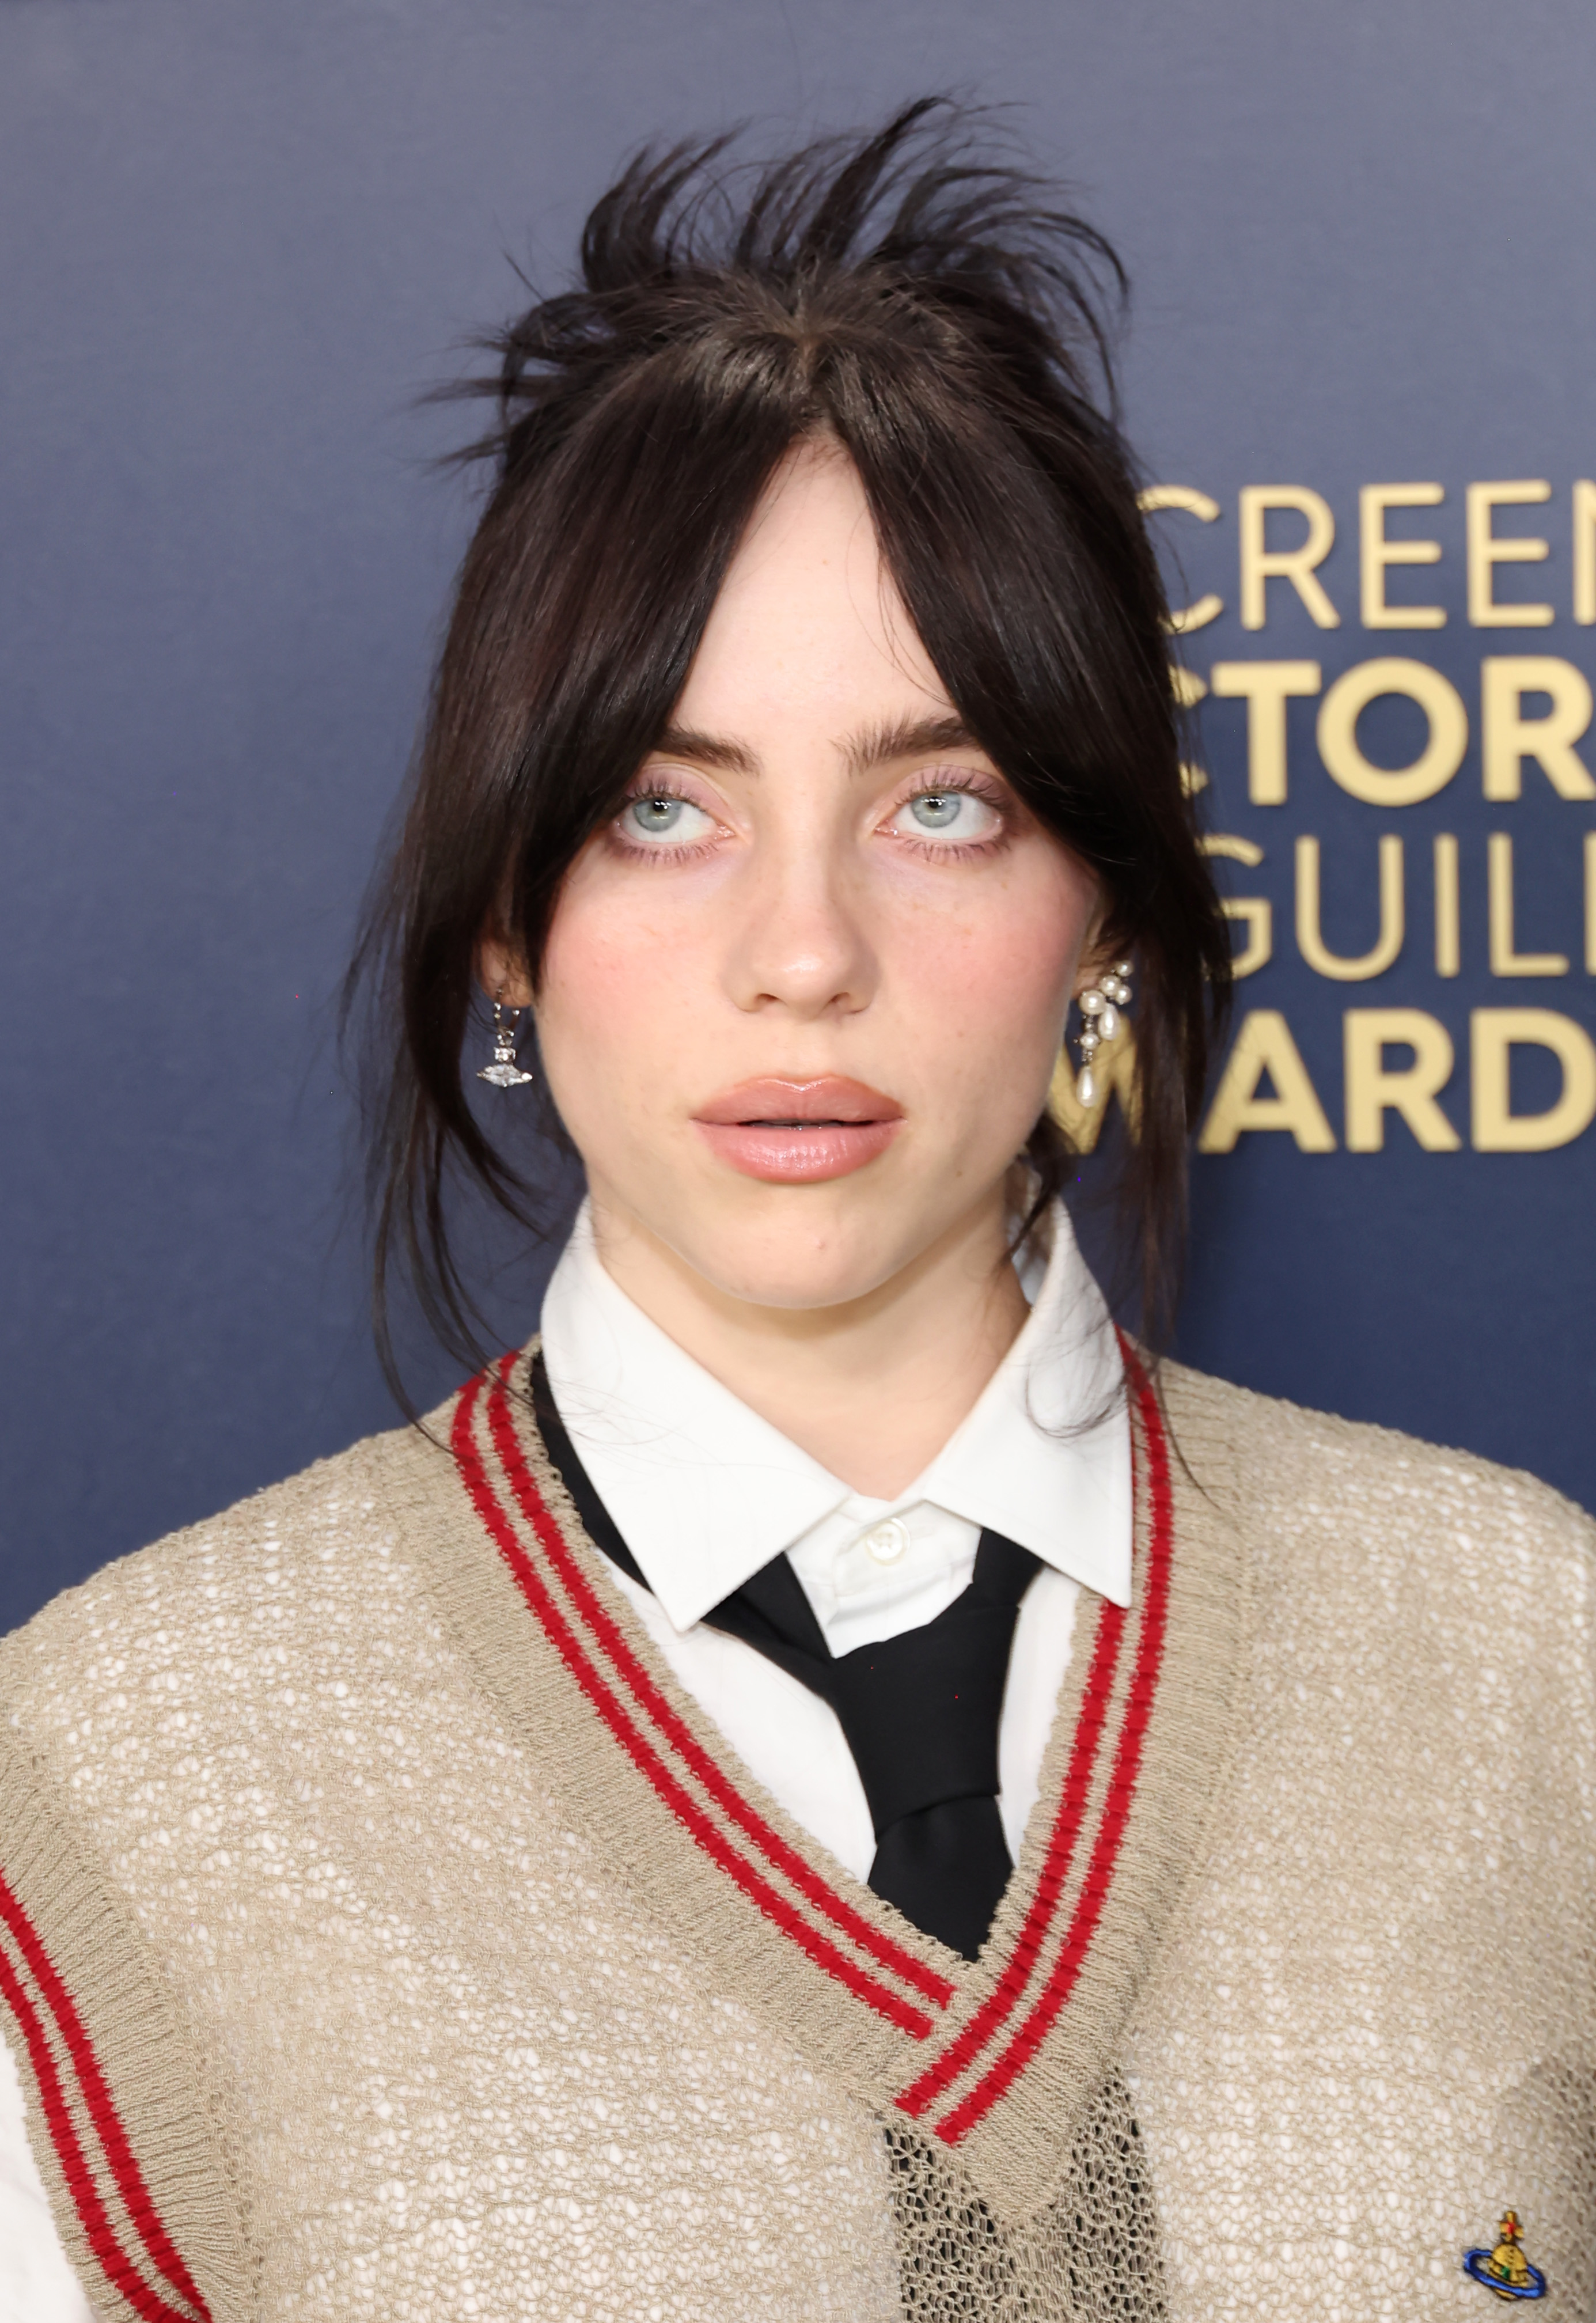 Billie Eilish at an event wearing a beige sweater vest over a white shirt with lace detailing